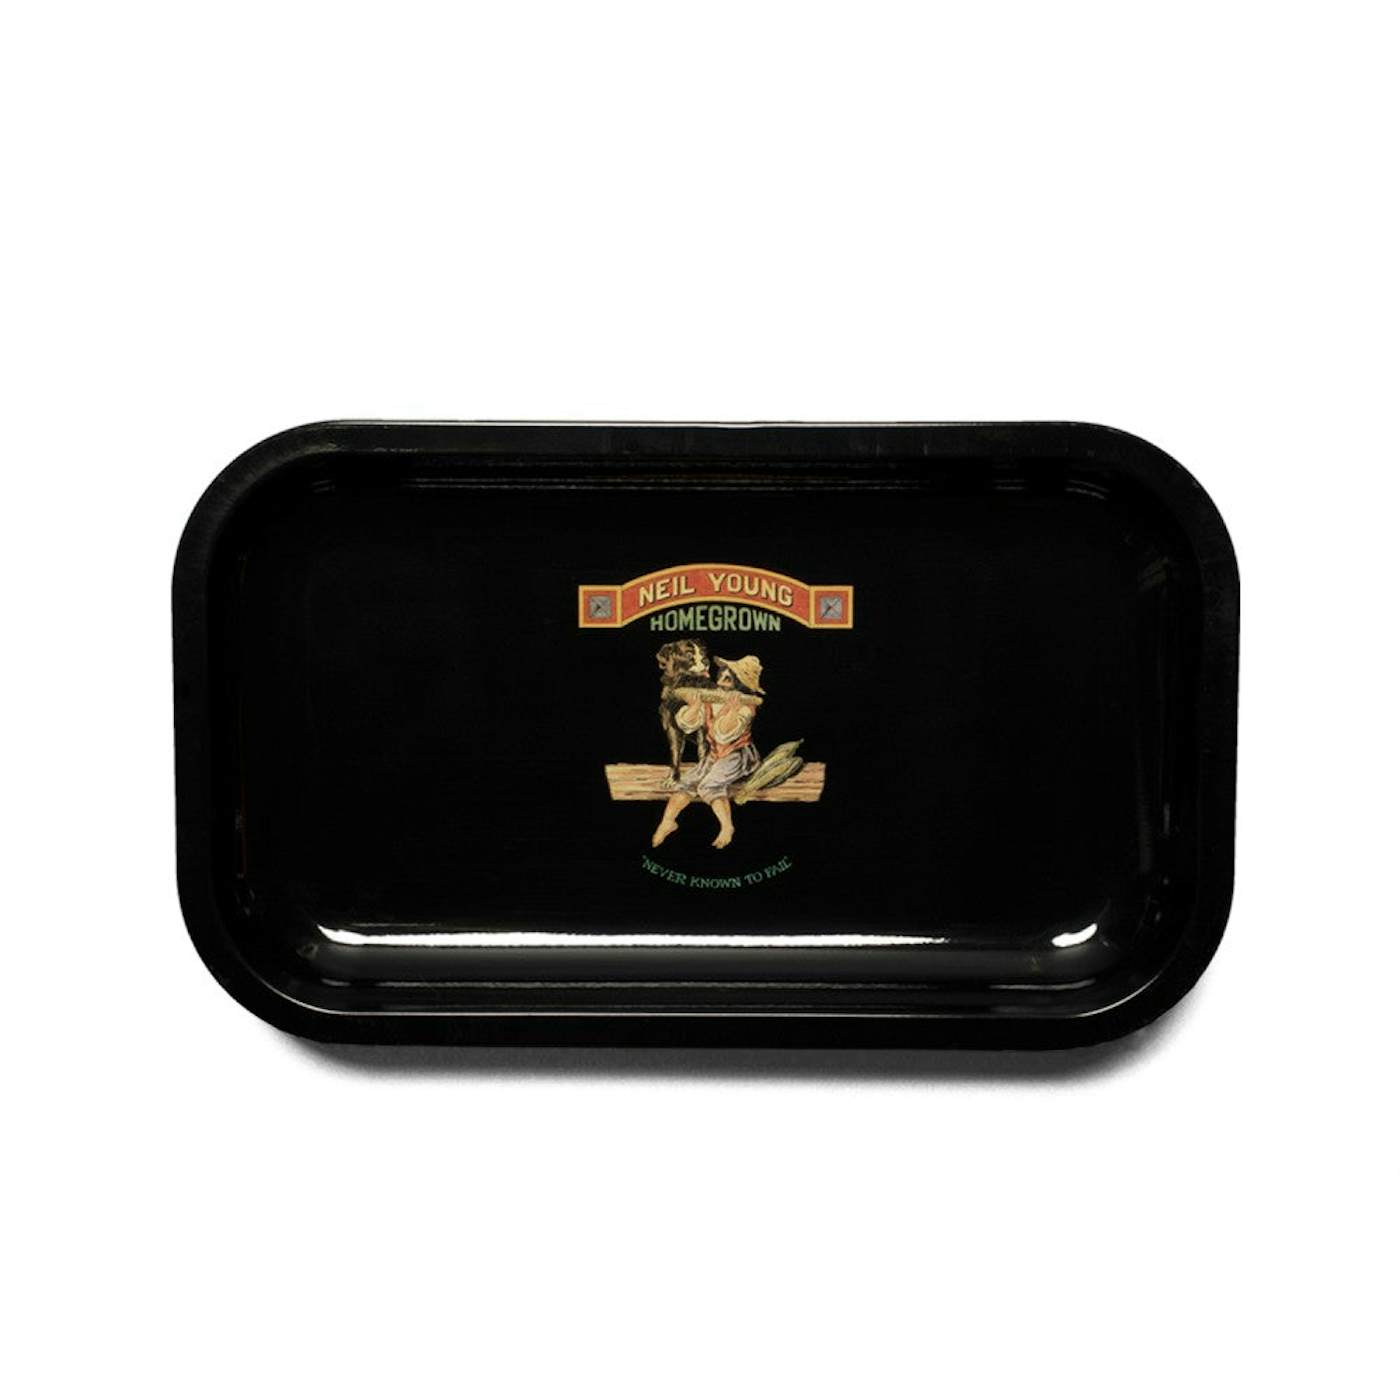 Neil Young Homegrown Rolling Tray